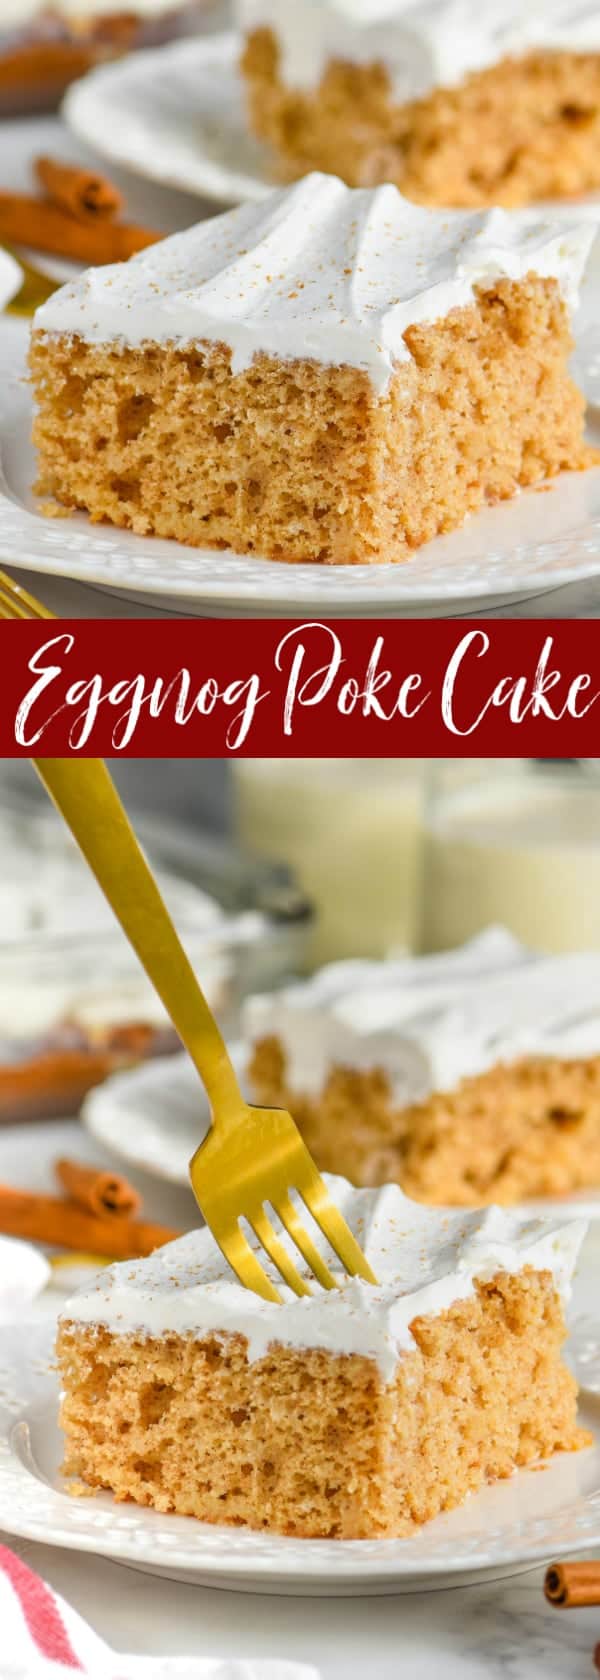 poke cake recipe with cool whip frosting on white plate